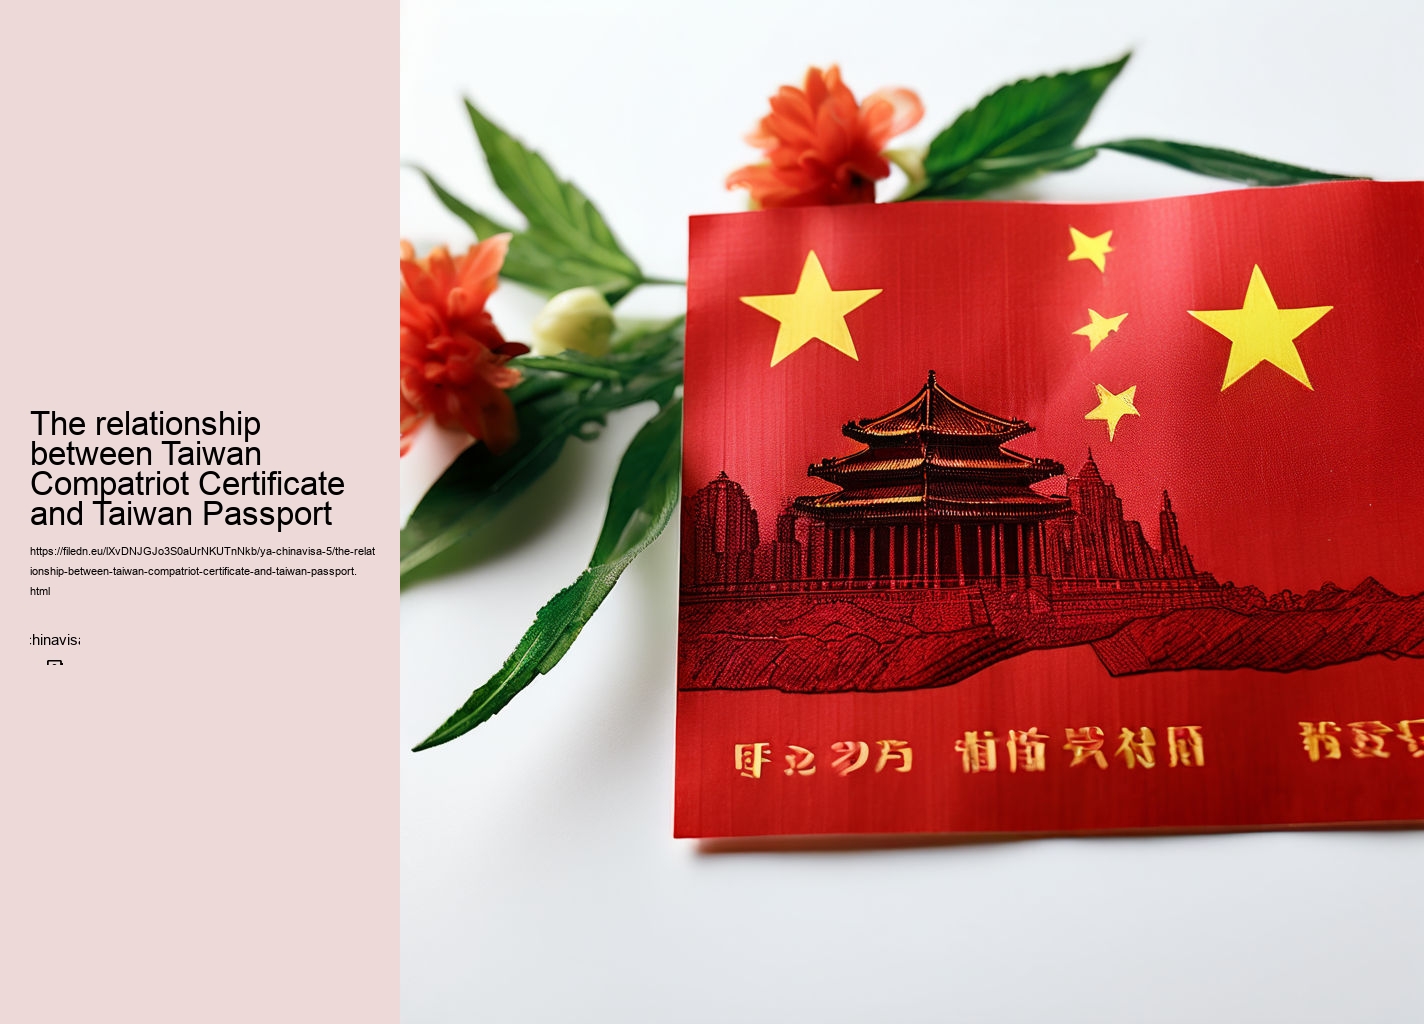 The relationship between Taiwan Compatriot Certificate and Taiwan Passport